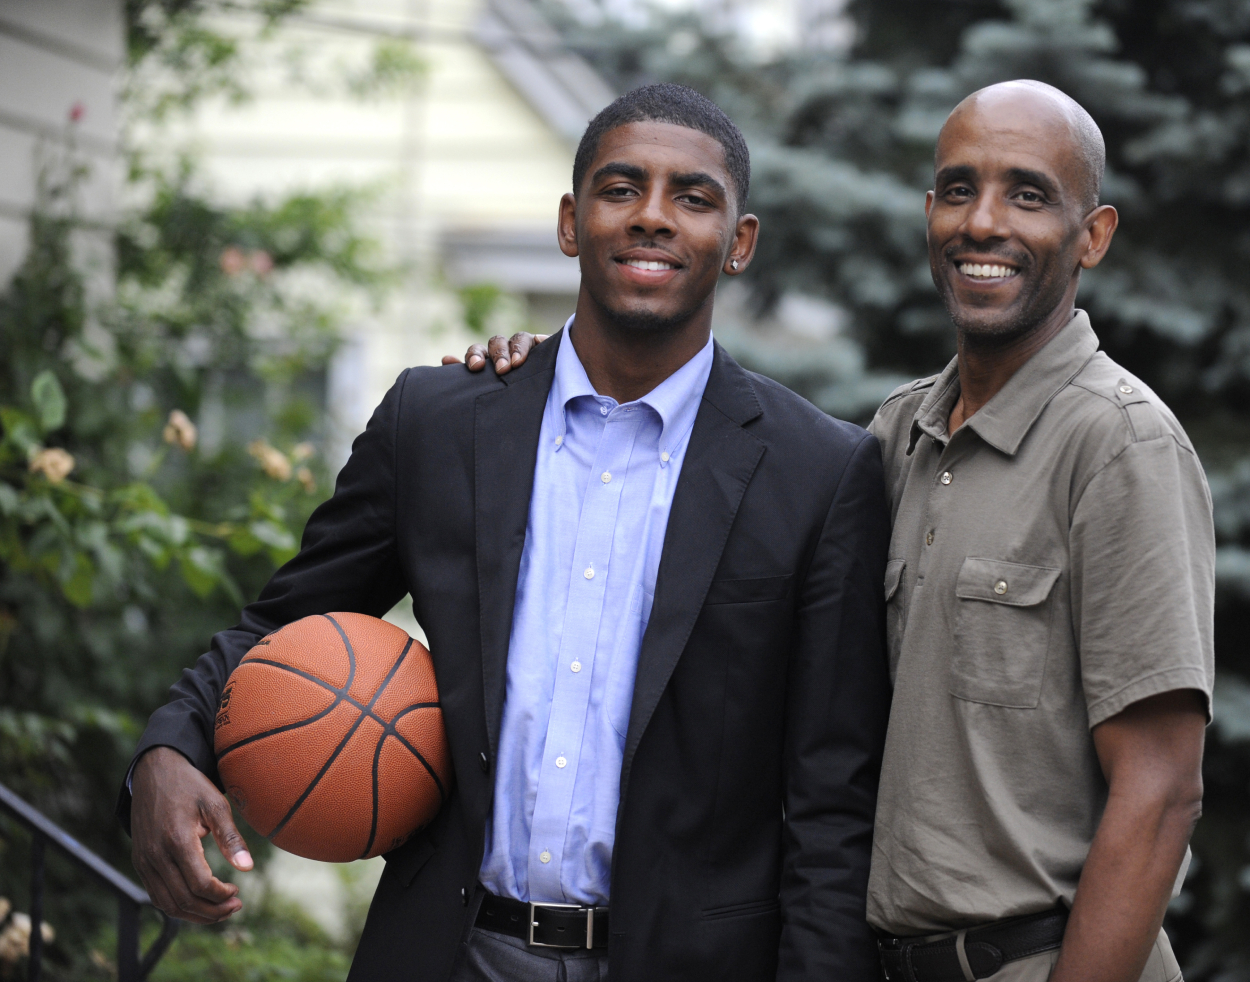 Kyrie Irving Lost His Mother at a Devastatingly Young Age